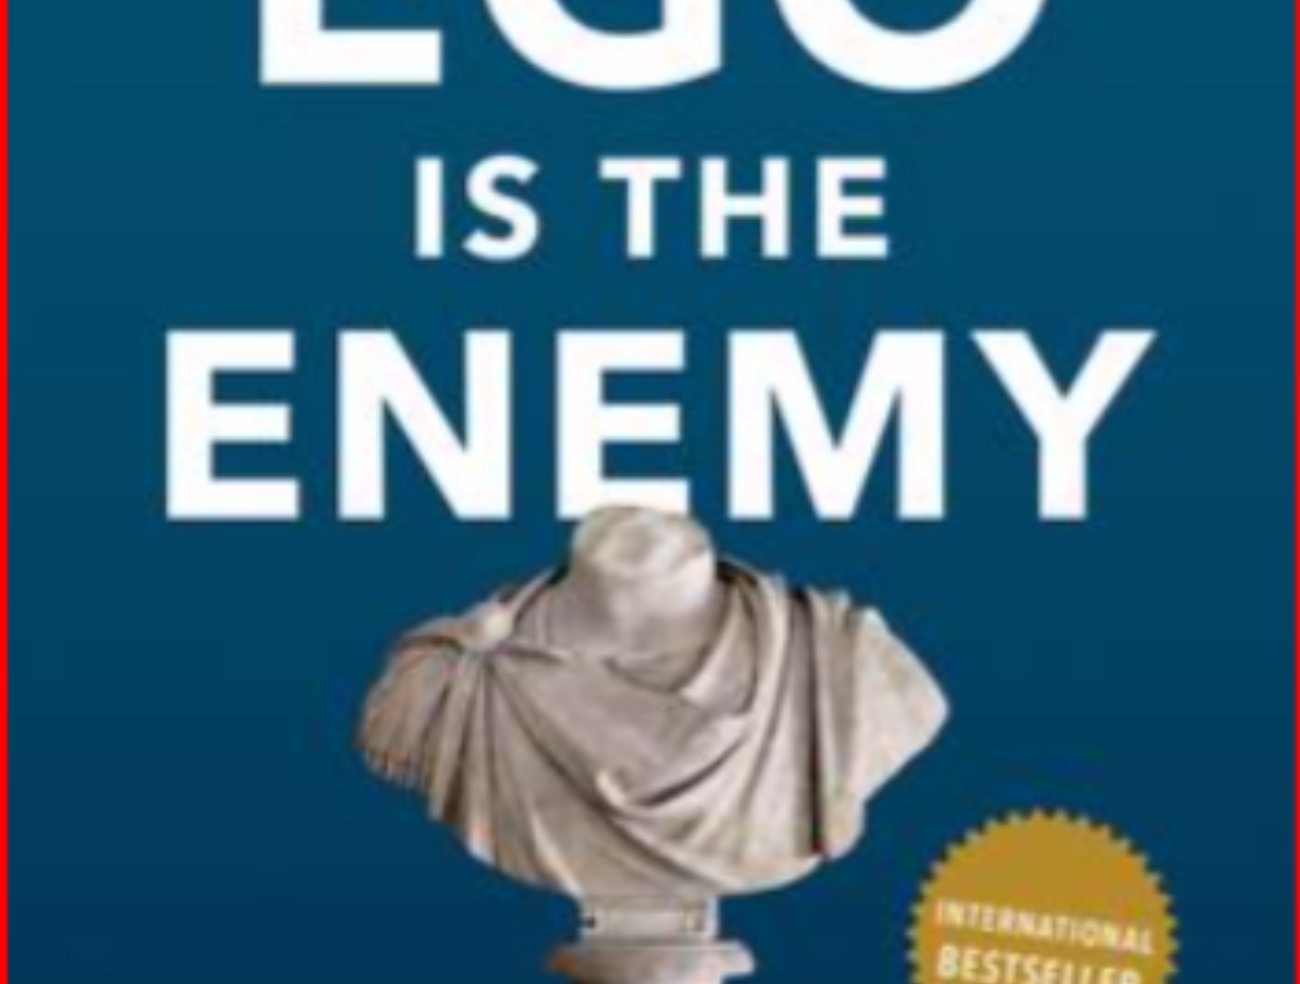 Book review: Ego is the enemy by Ryan Holiday